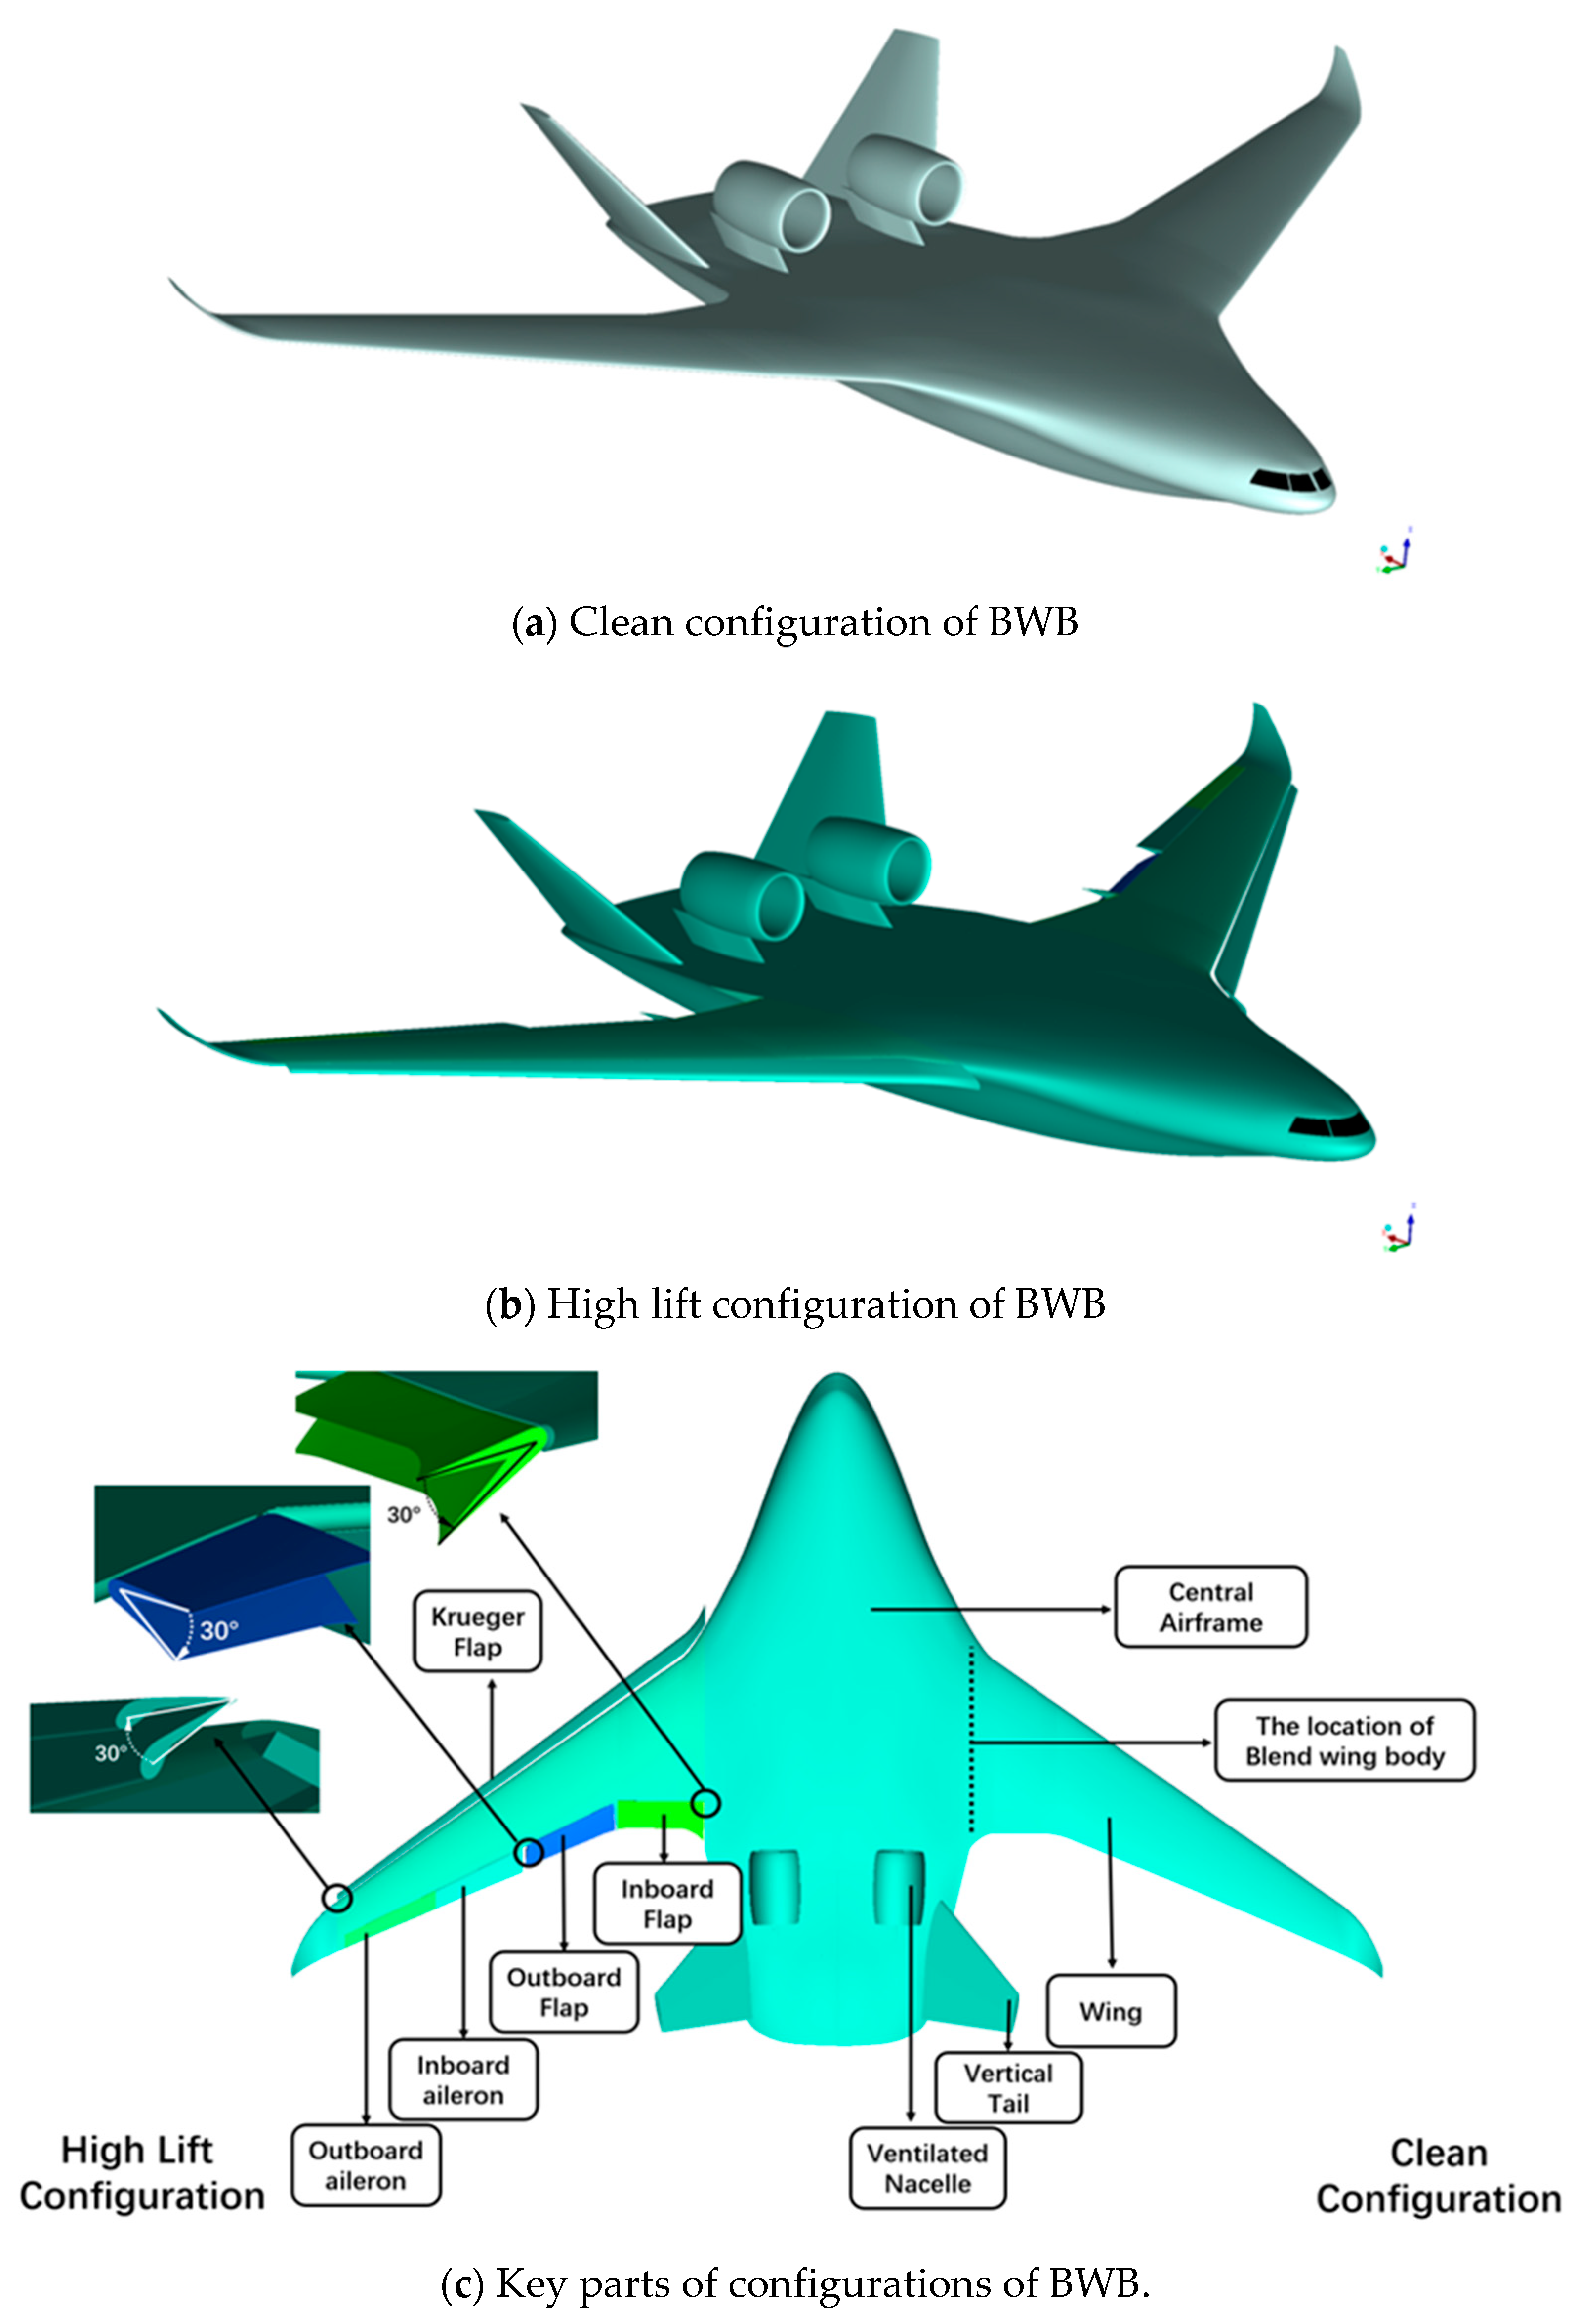 Aerodynamic considerations of blended wing body aircraft